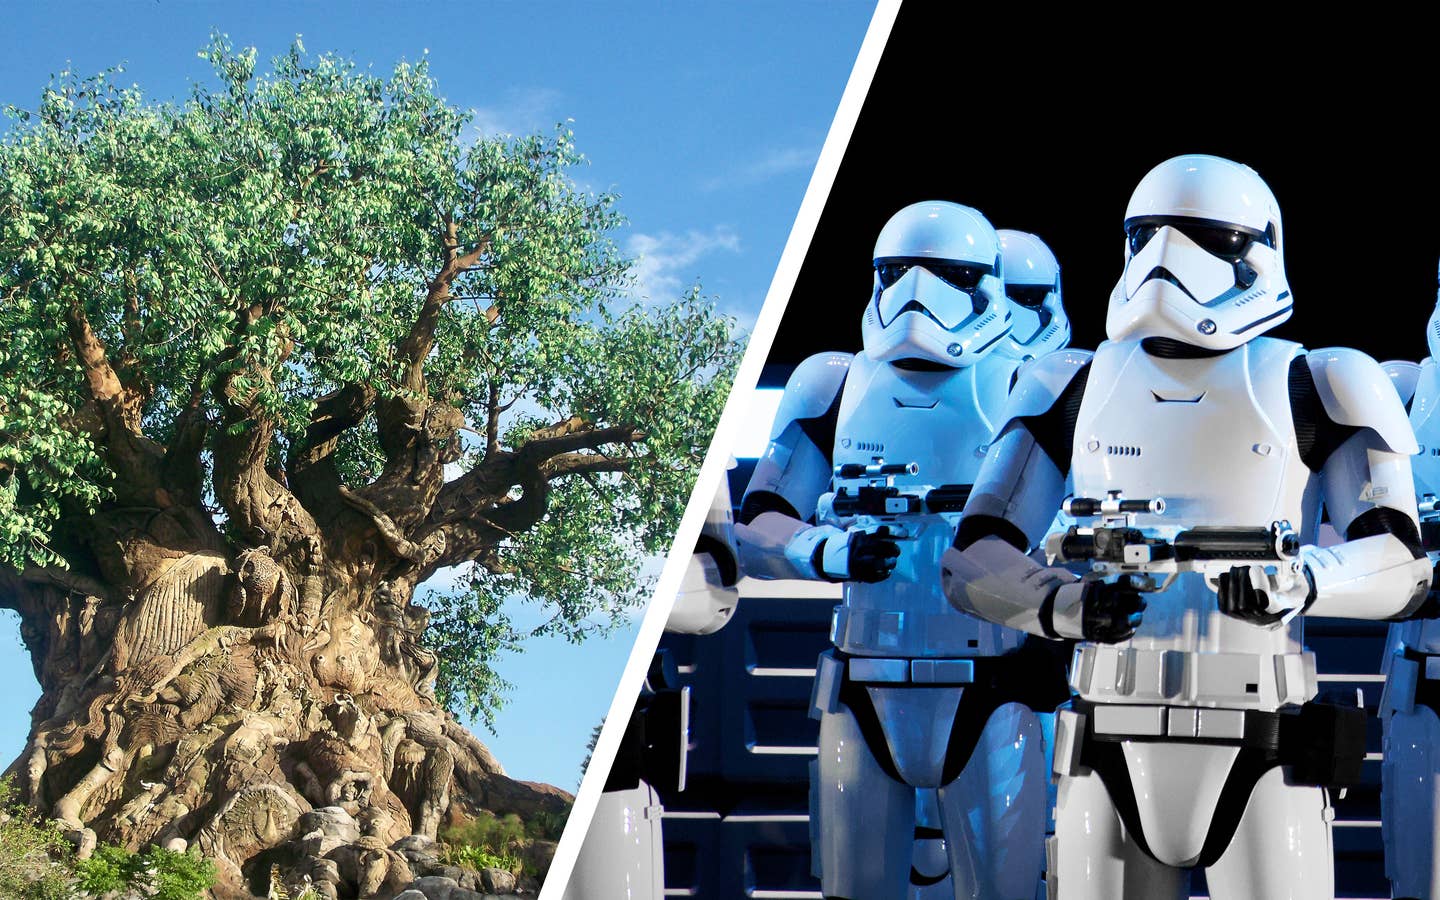 Left: The Tree of Life at Disney's Animal Kingdom Theme Park. Right: Storm Troopers stand at Disney's Hollywood Studios at Star Wars: Rise fo the Resistance.